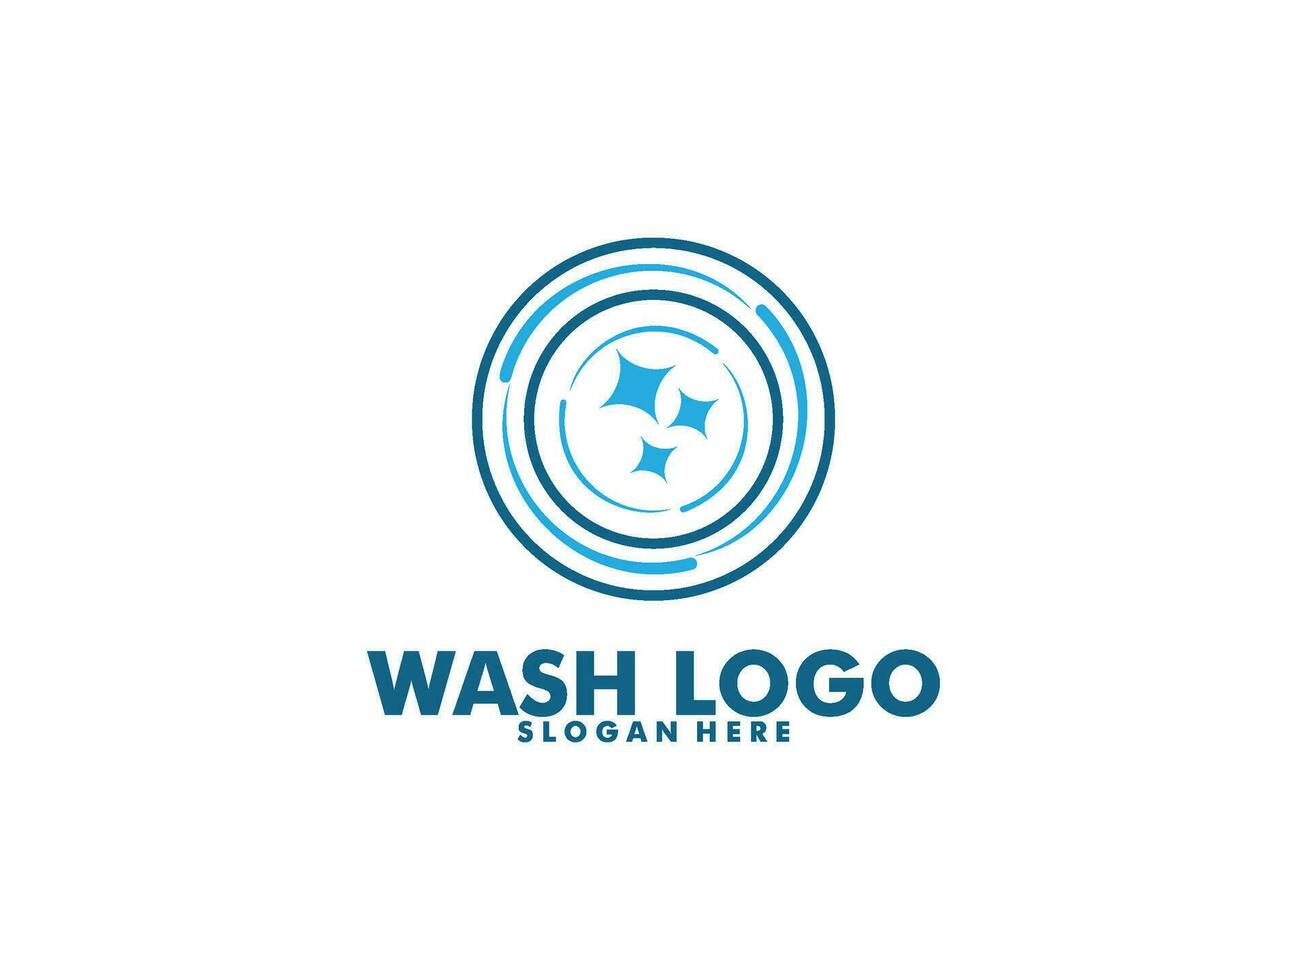 laundry icon washing machine logo design for business clothes wash cleans modern template vector